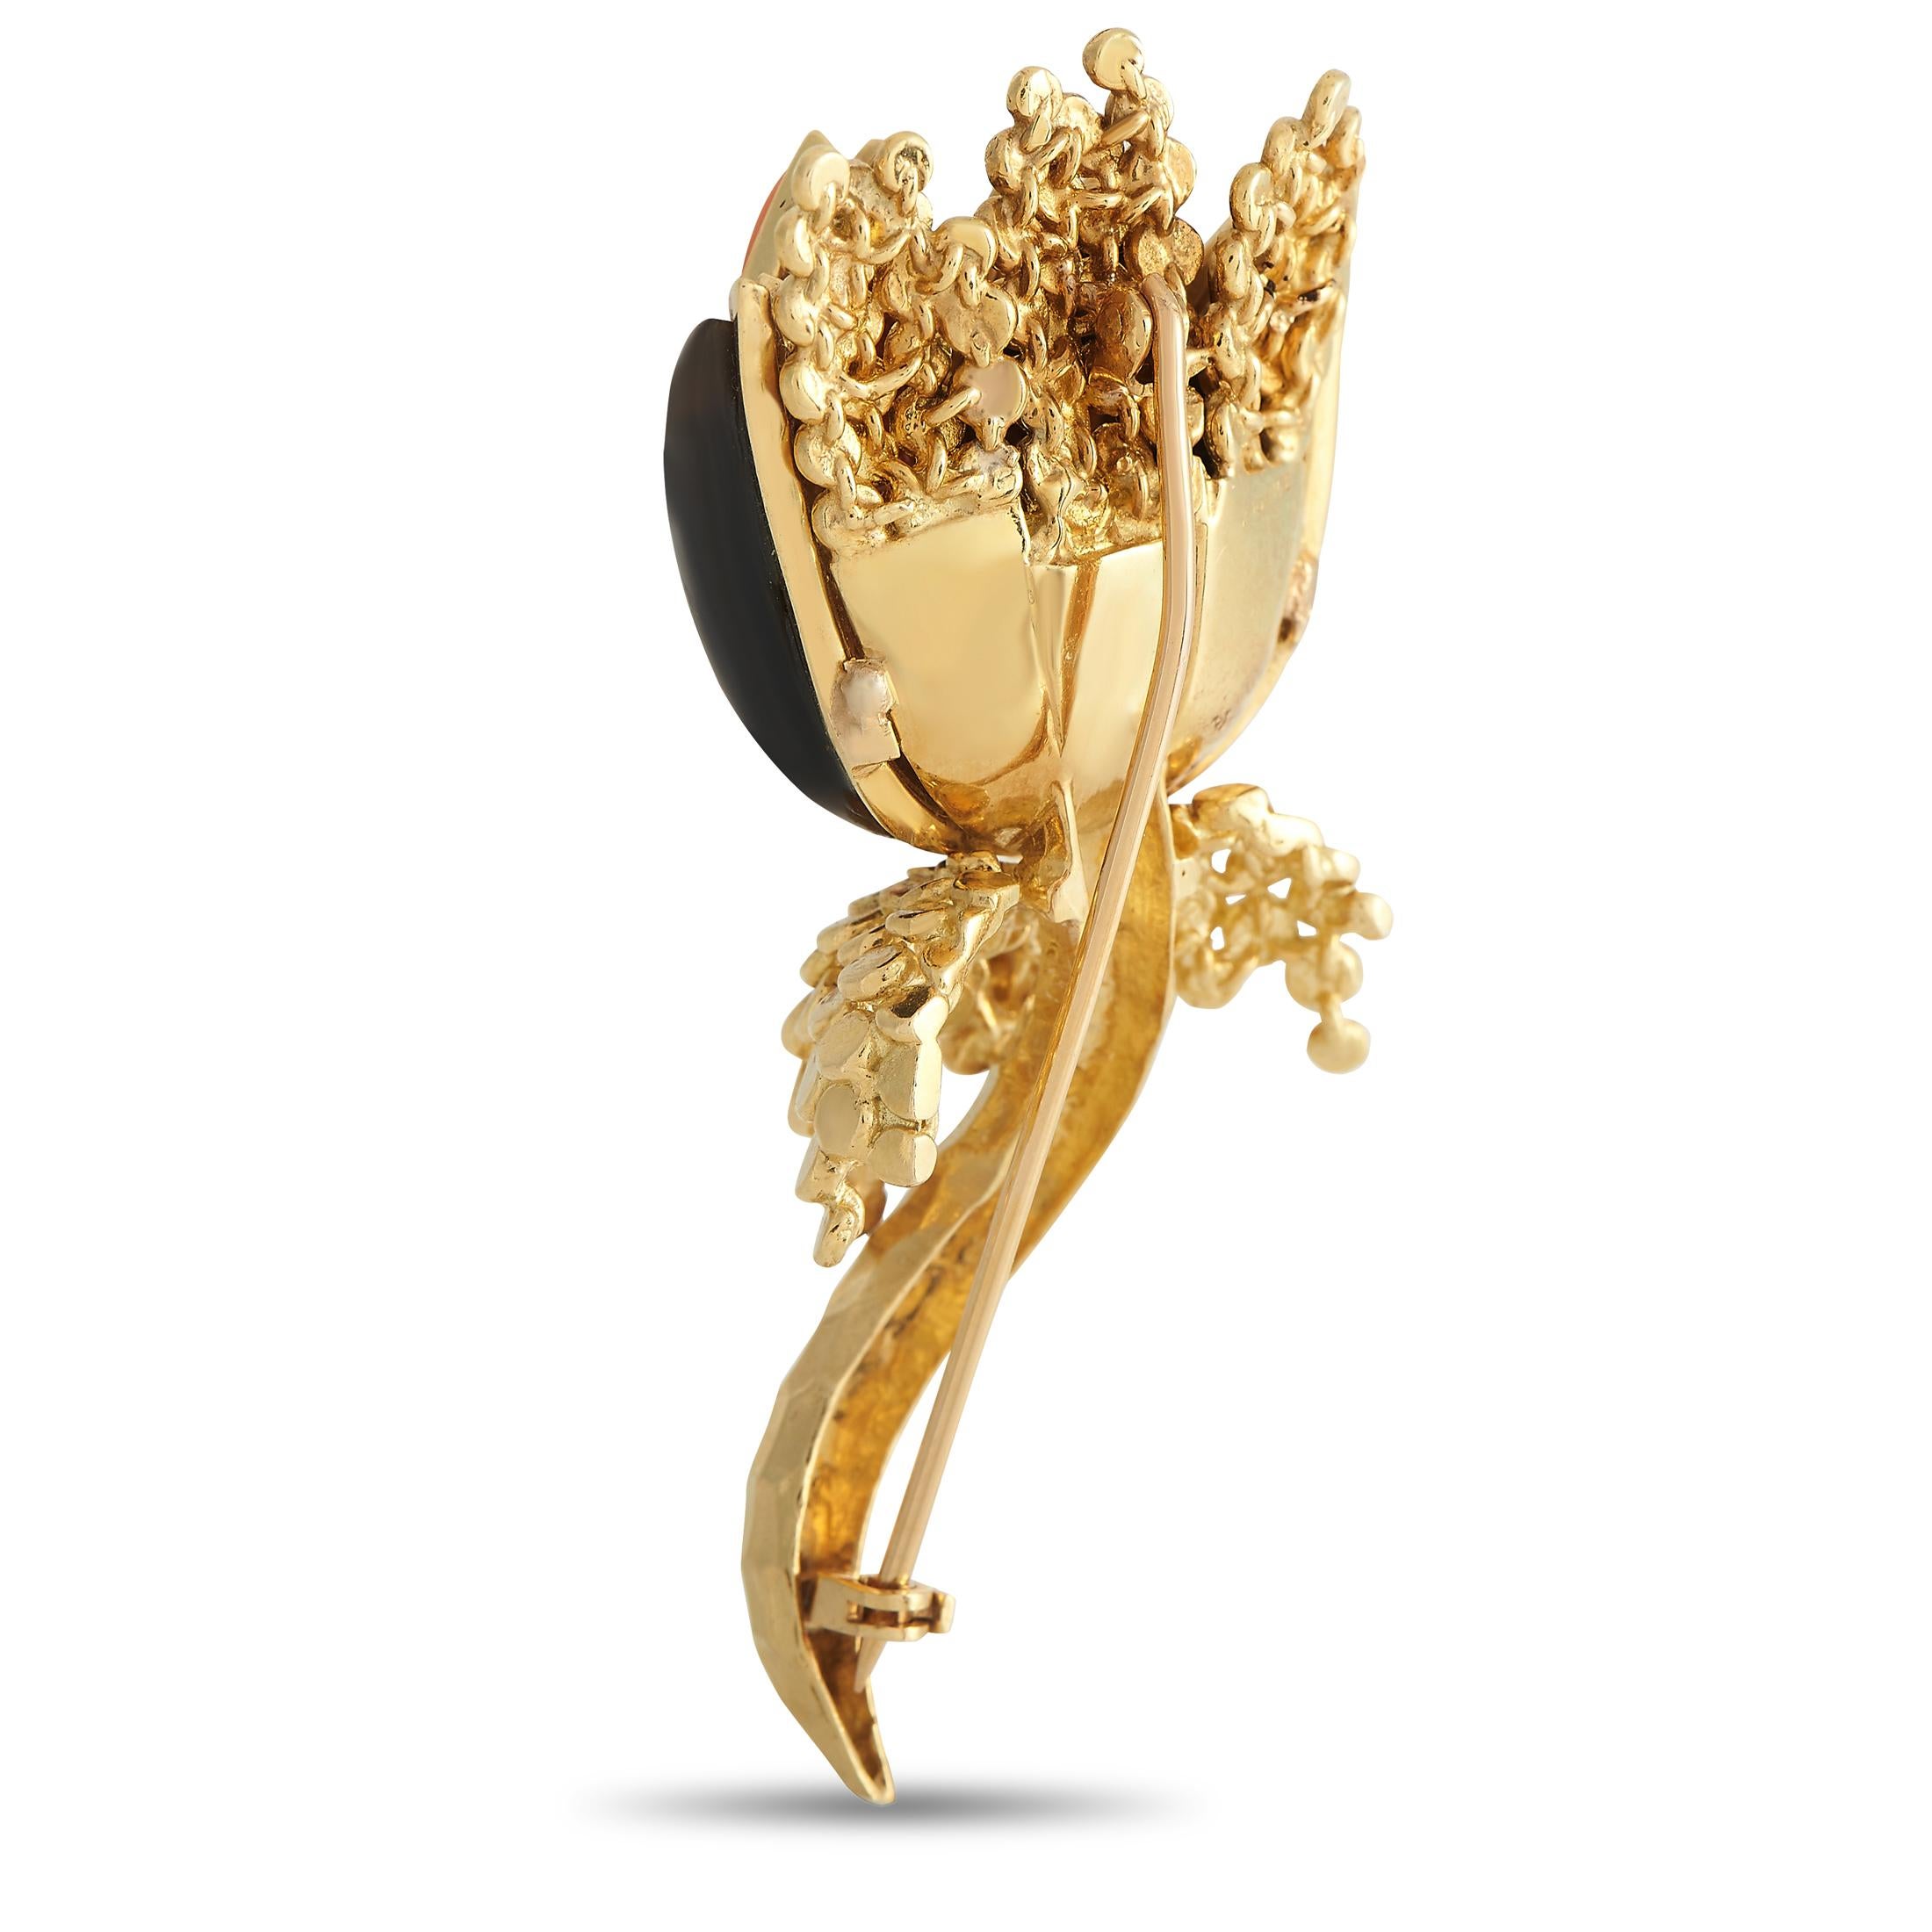 Give your wardrobe the royal treatment by incorporating this statement-making brooch designed in France. It is made from 18K yellow gold and features a flower bud silhouette. The shapely petals come with a coral and citrine inlay. The bud sits atop